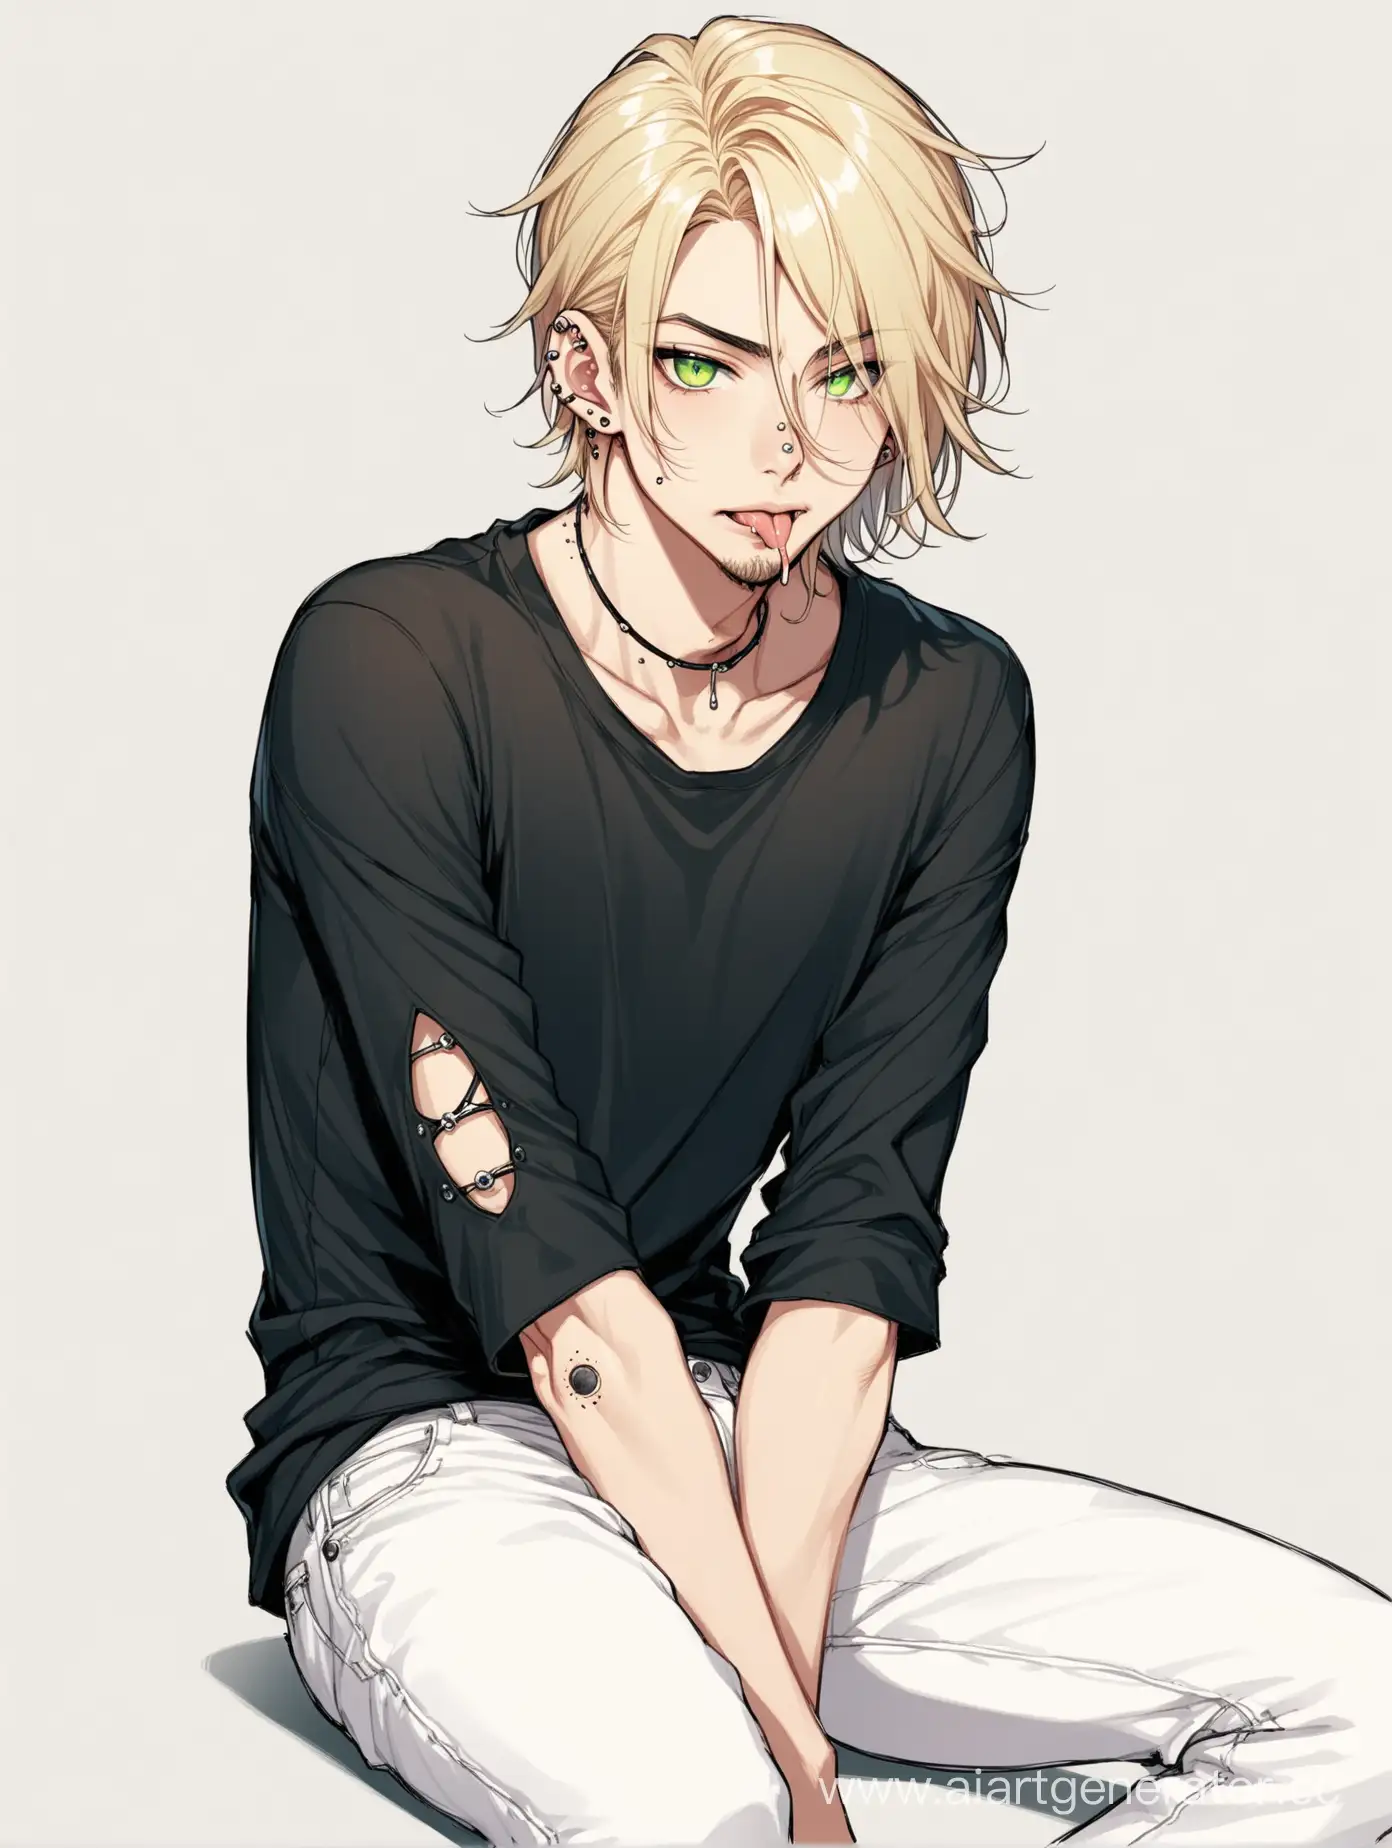 Young-Man-with-Piercings-in-Black-Shirt-and-White-Jeans